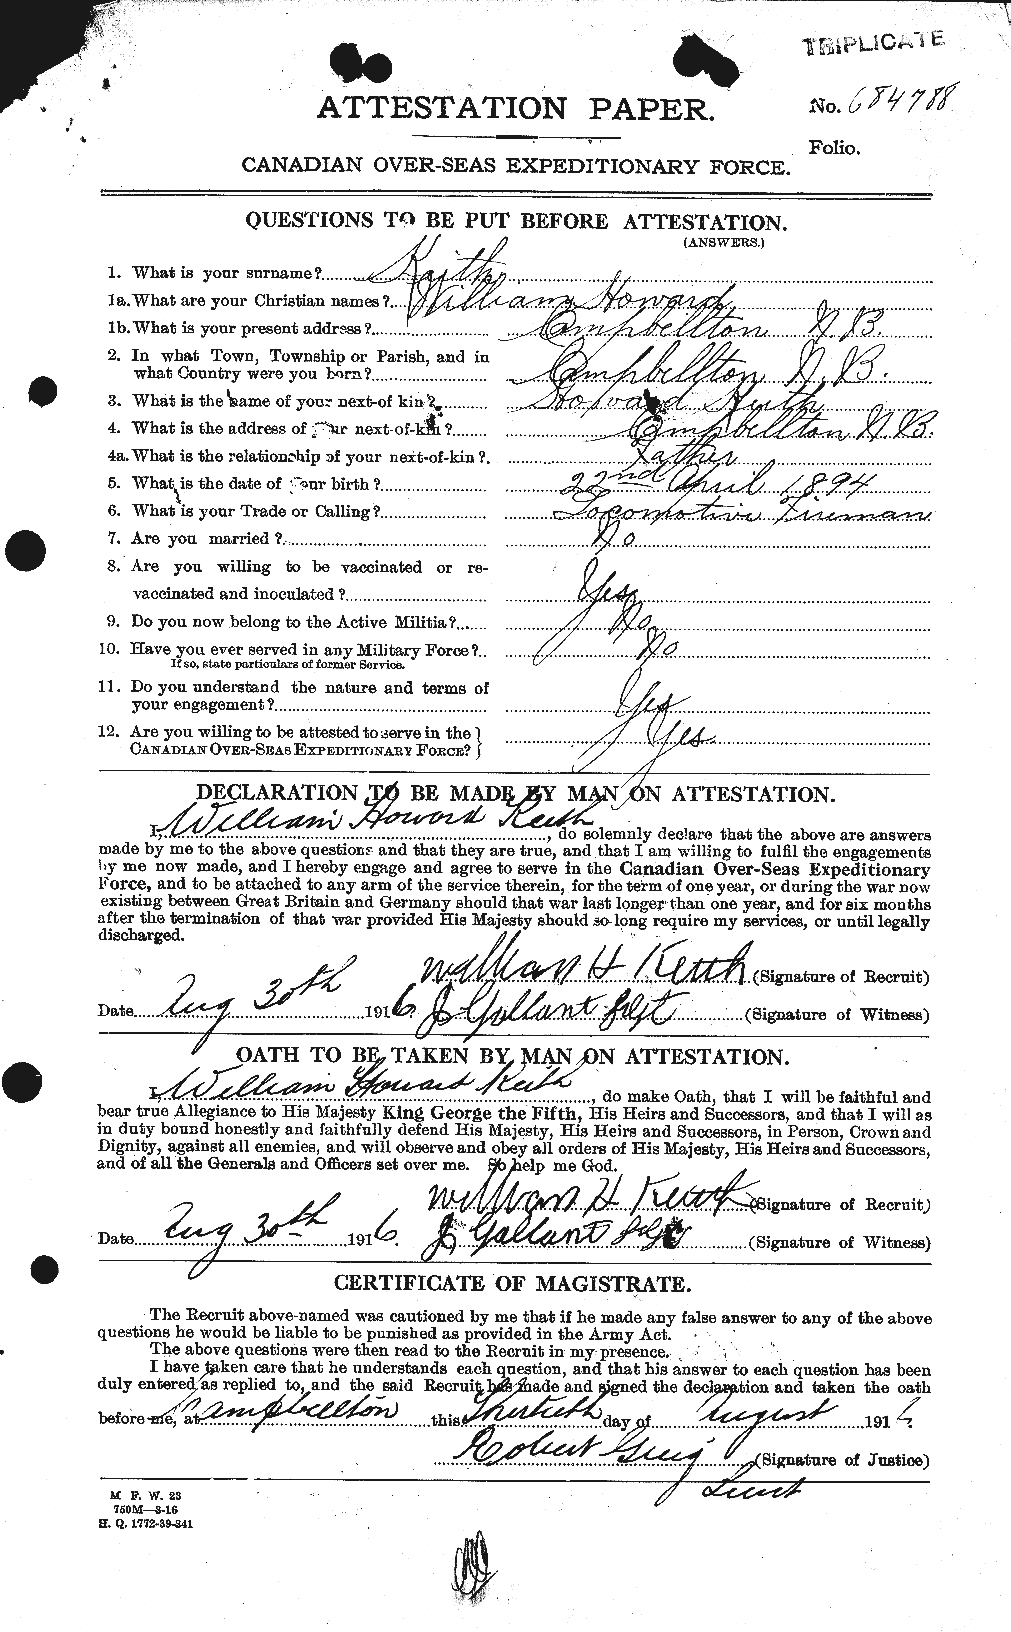 Personnel Records of the First World War - CEF 432518a